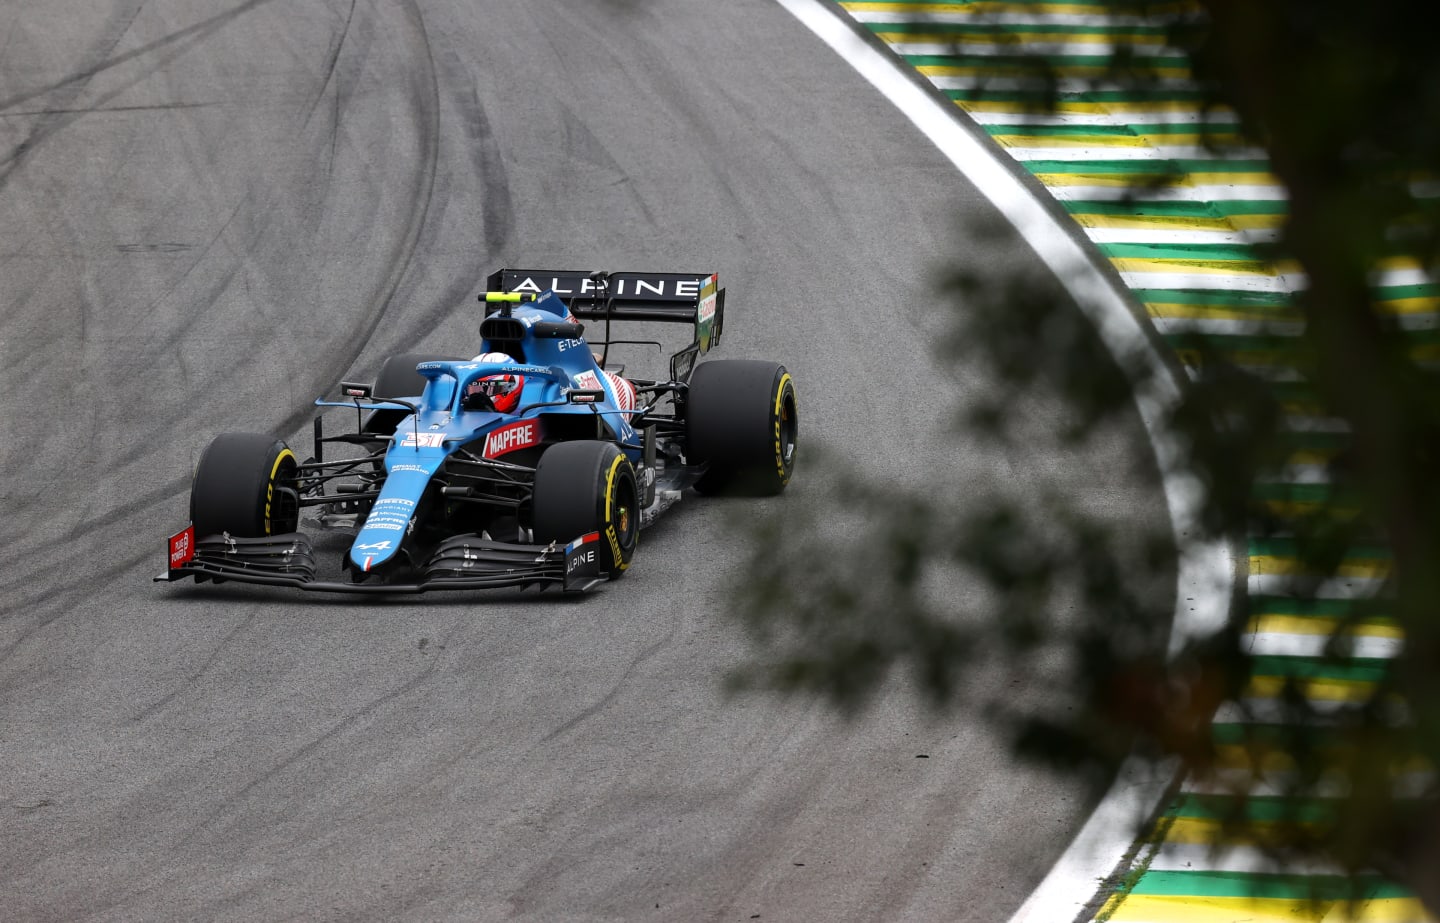 SAO PAULO, BRAZIL - NOVEMBER 12: Esteban Ocon of France driving the (31) Alpine A521 Renault during practice ahead of the F1 Grand Prix of Brazil at Autodromo Jose Carlos Pace on November 12, 2021 in Sao Paulo, Brazil. (Photo by Buda Mendes/Getty Images)